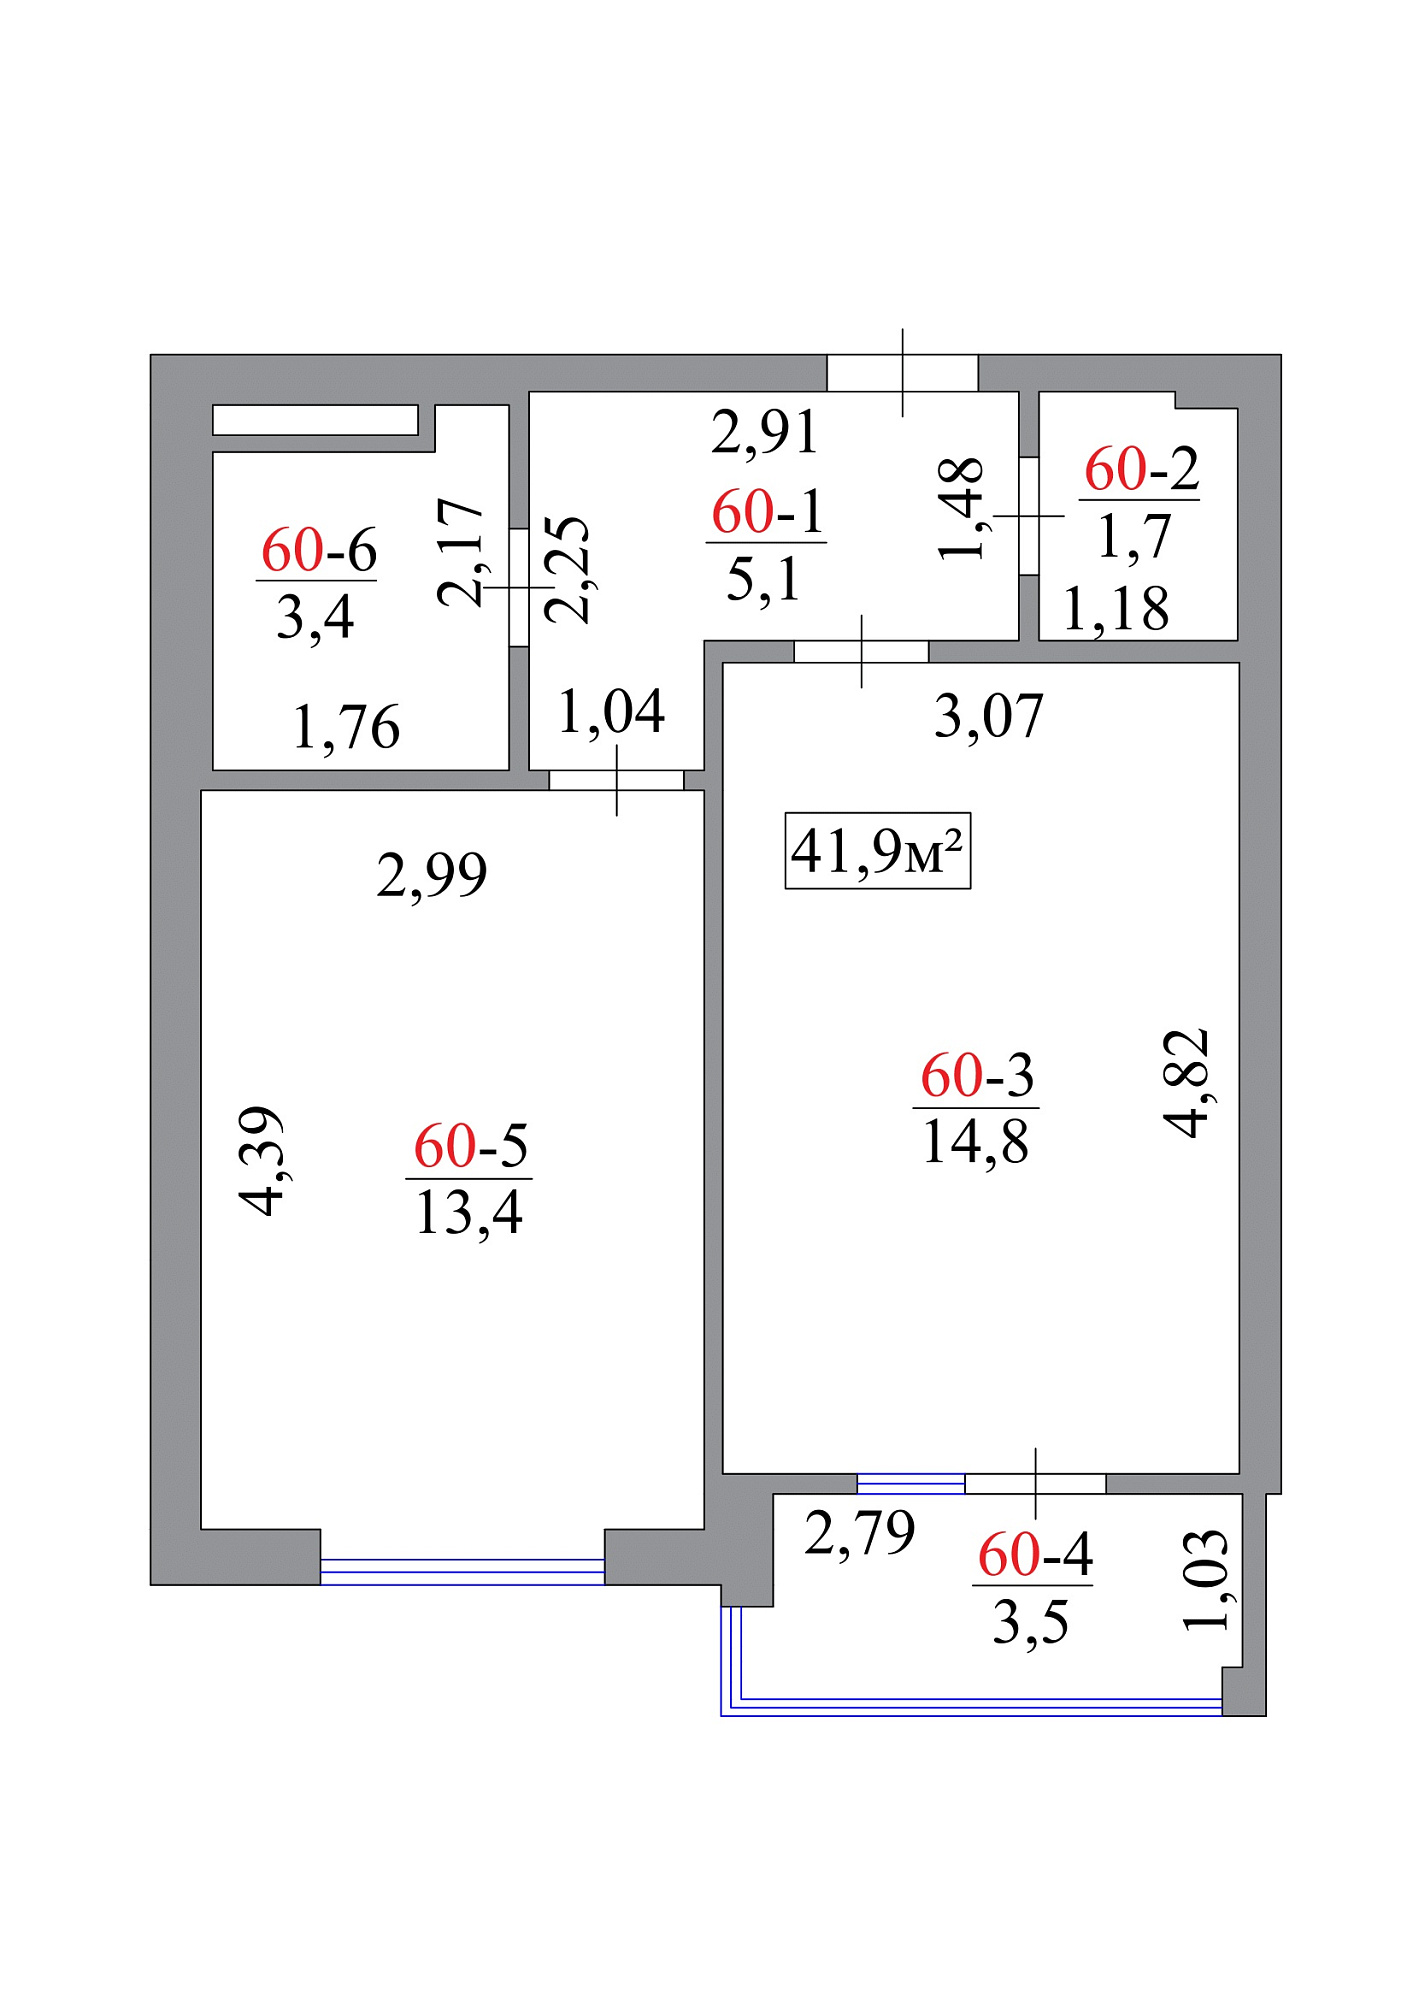 Planning 1-rm flats area 41.9m2, AB-07-06/00054.